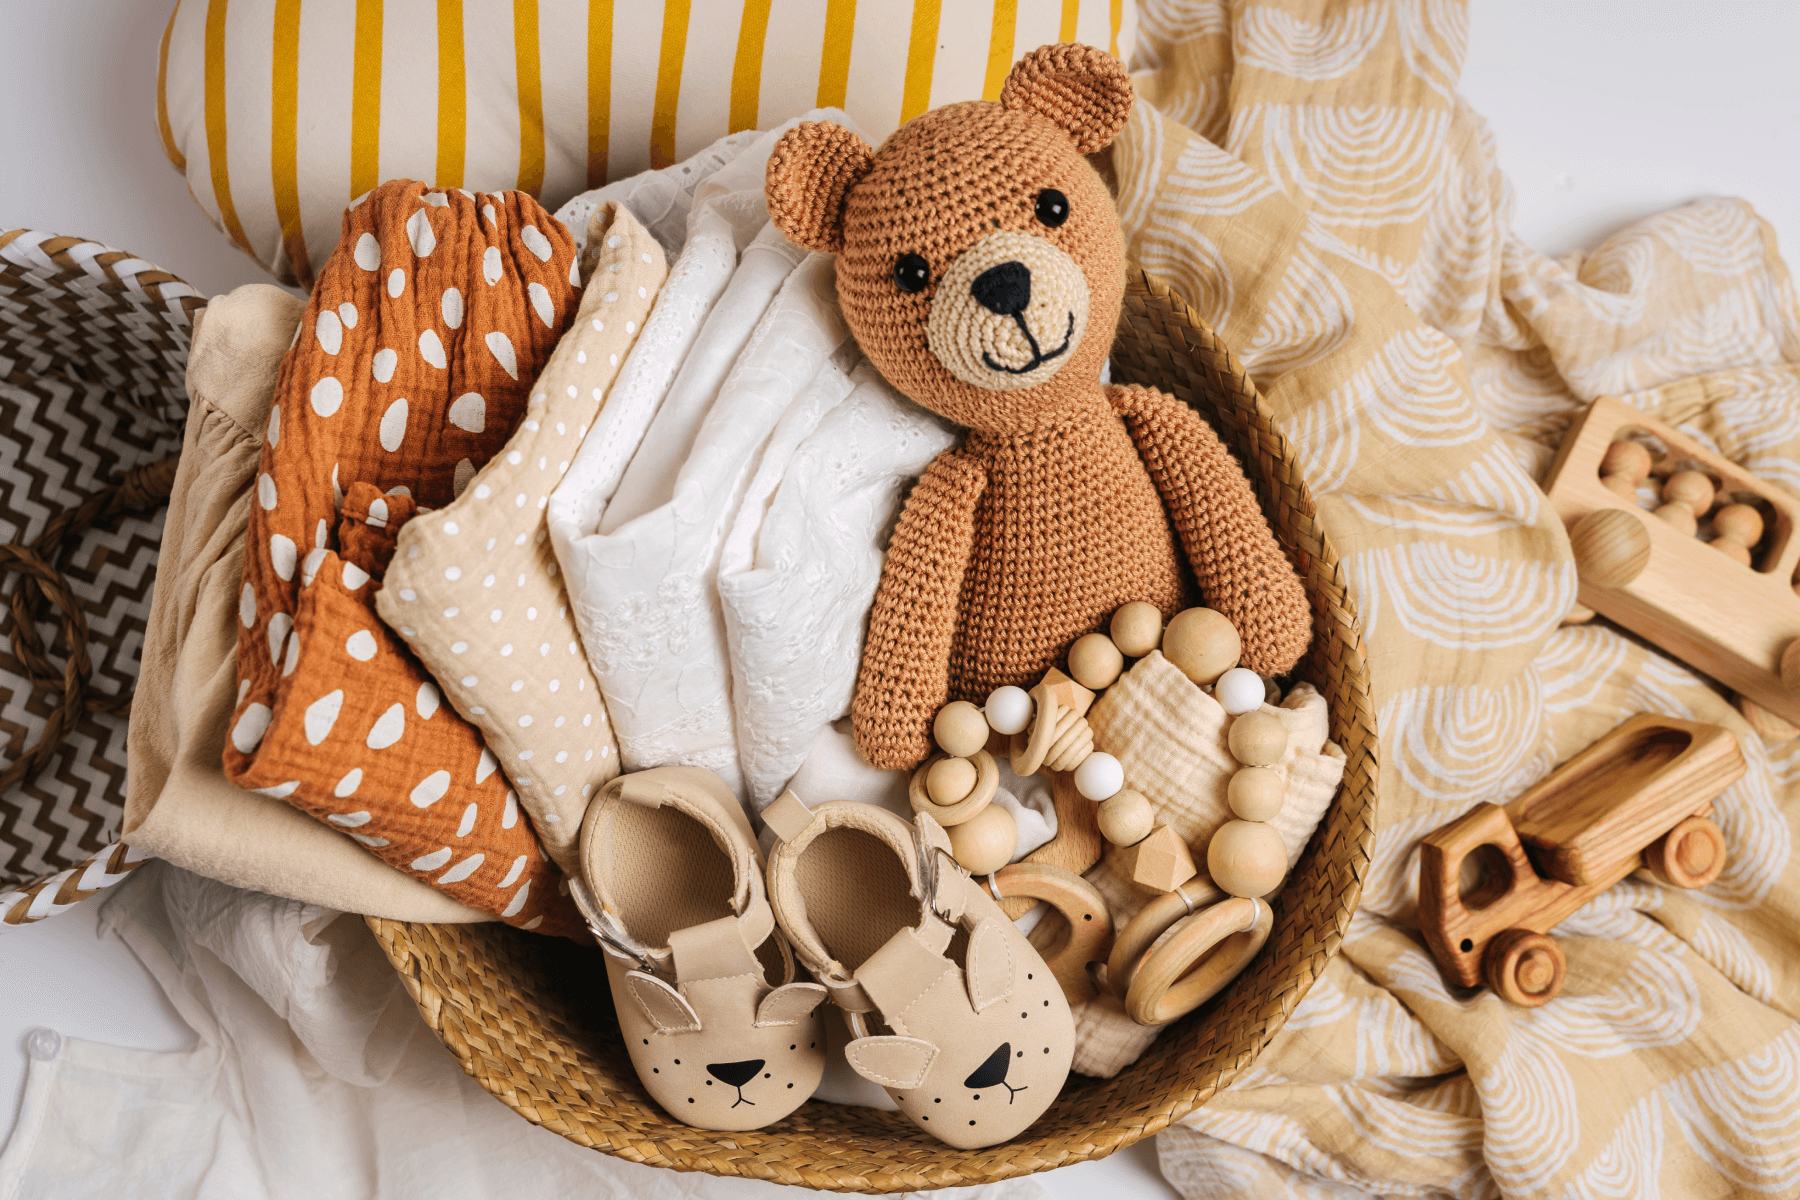 A woven basket shown from above is filled with neutral colored and polka dotted linens, a knit teddy bear, wooden baby teething toys, and baby shoes.